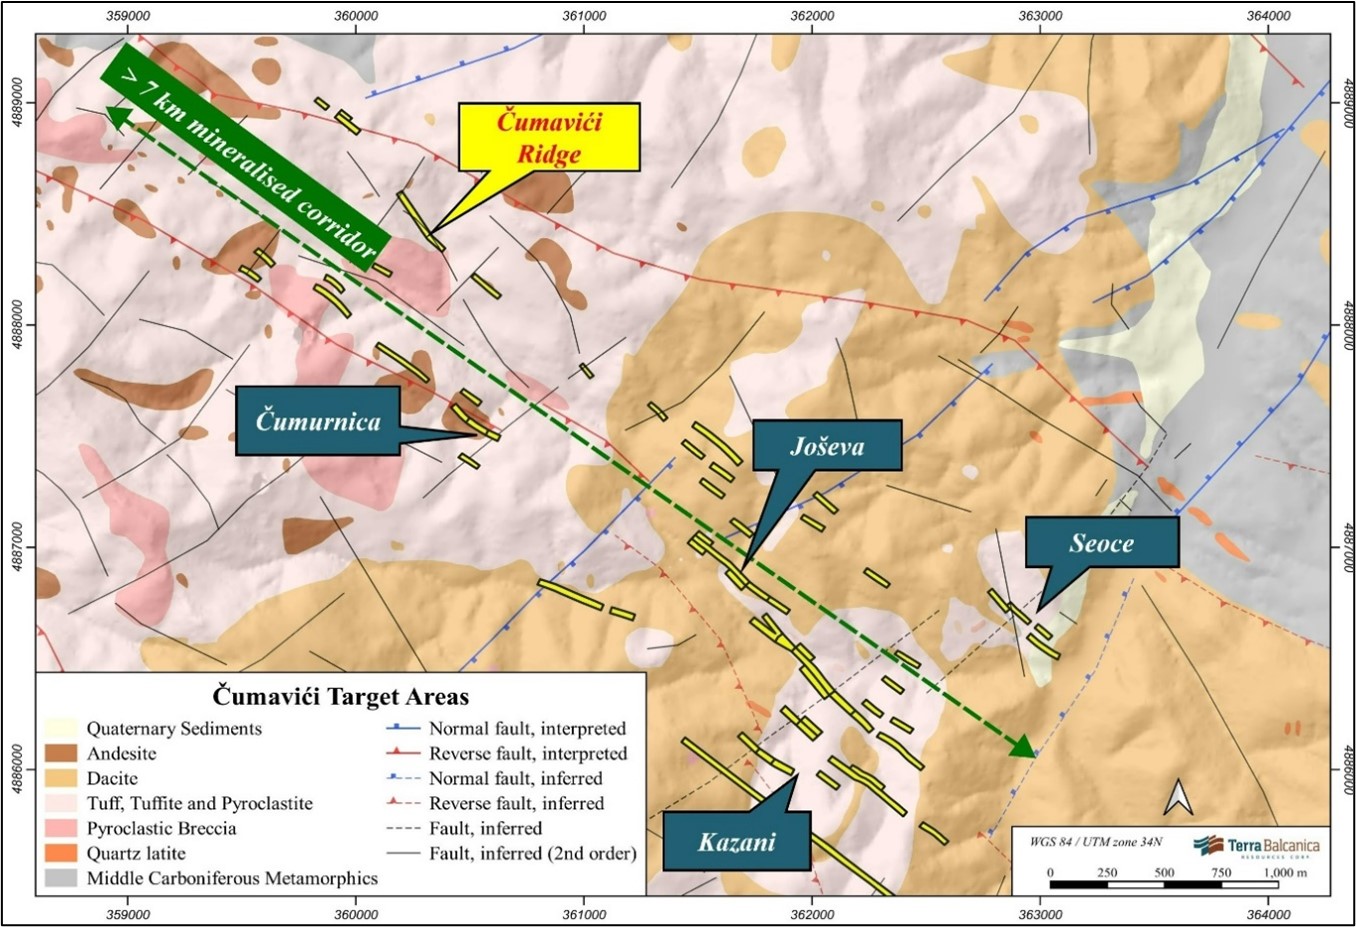 Geological map of Cumavici with the identified targets. Current drilling efforts are focused at Cumavici Ridge. Vein mineralisation is highlighted as yellow ribbons